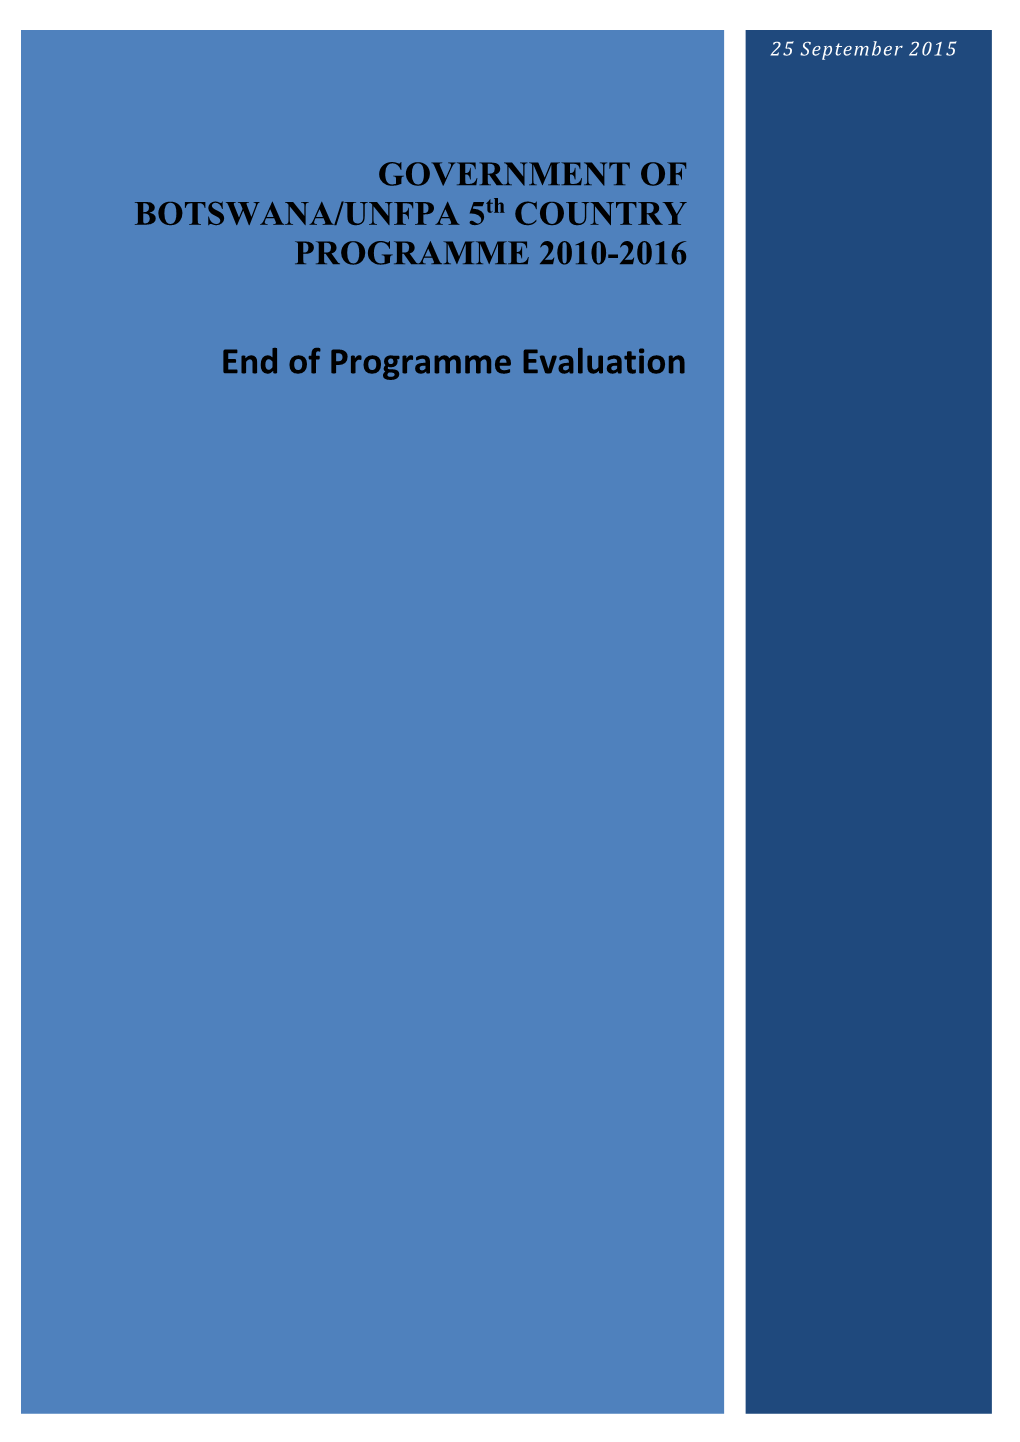 GOVERNMENT of BOTSWANA/UNFPA 5Th COUNTRY PROGRAMME 2010-2016